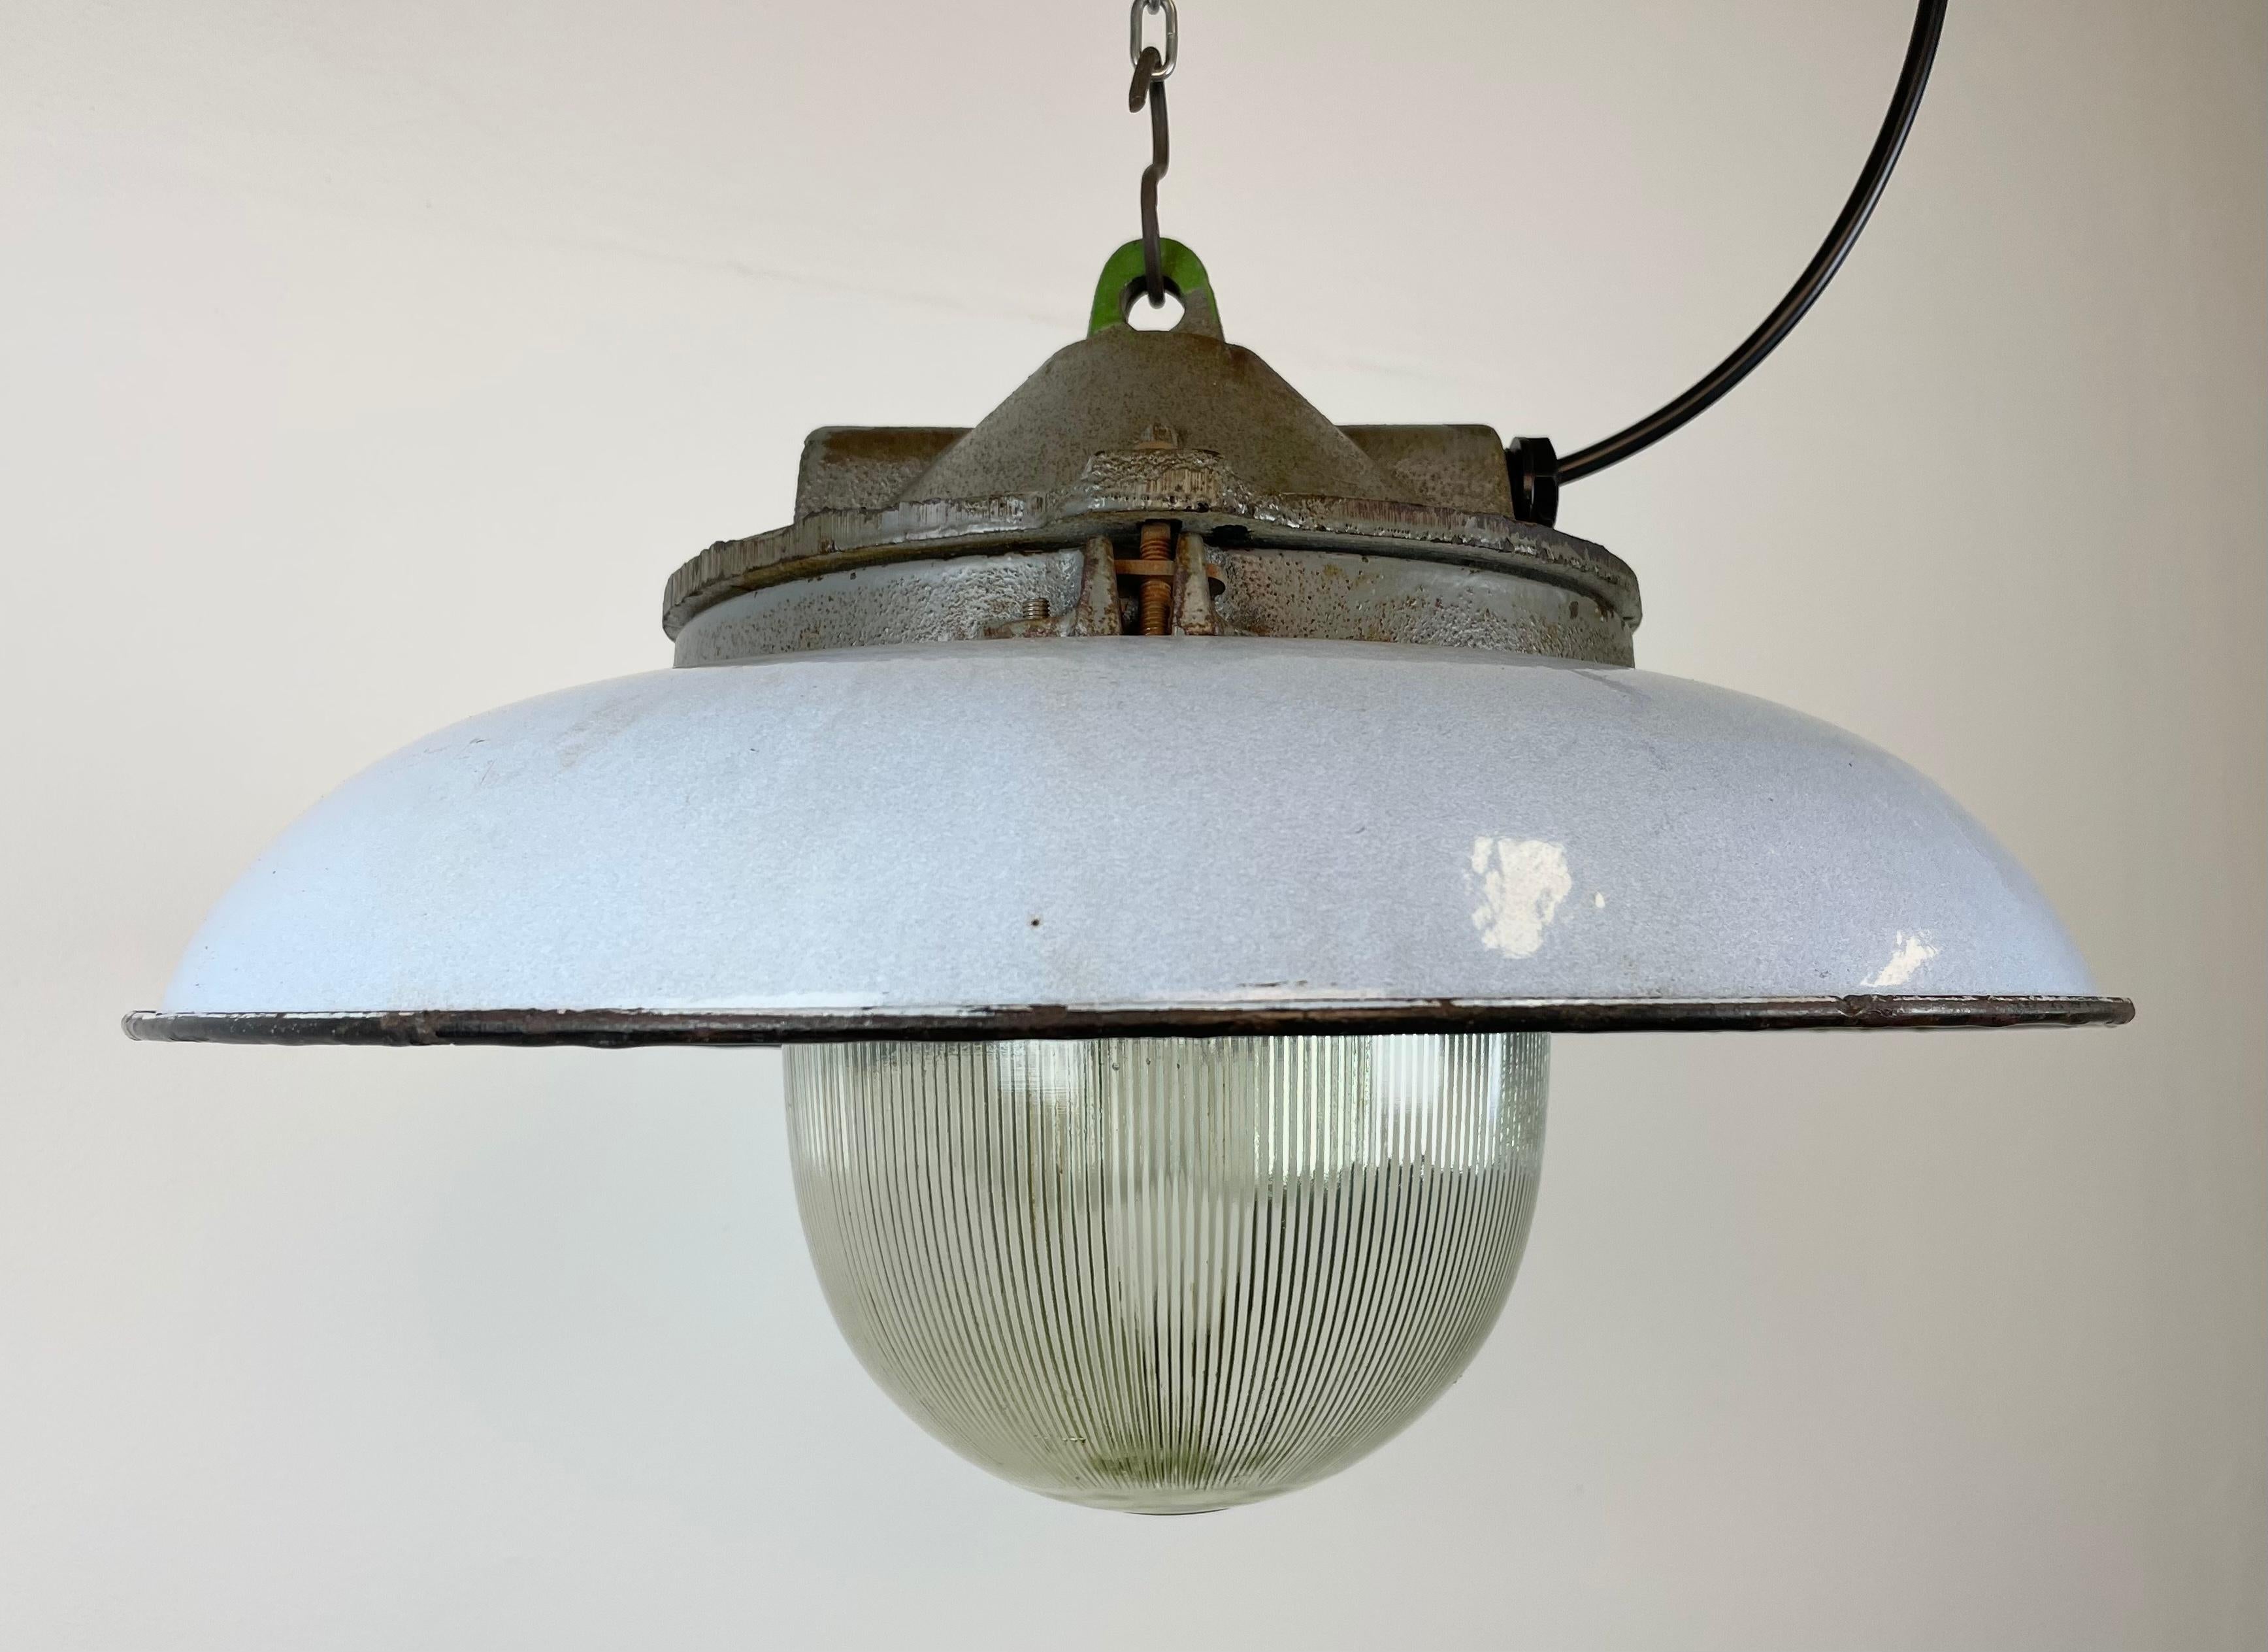 Polish Industrial Blue Enamel Factory Pendant Lamp in Cast Iron from Zaos, 1960s For Sale